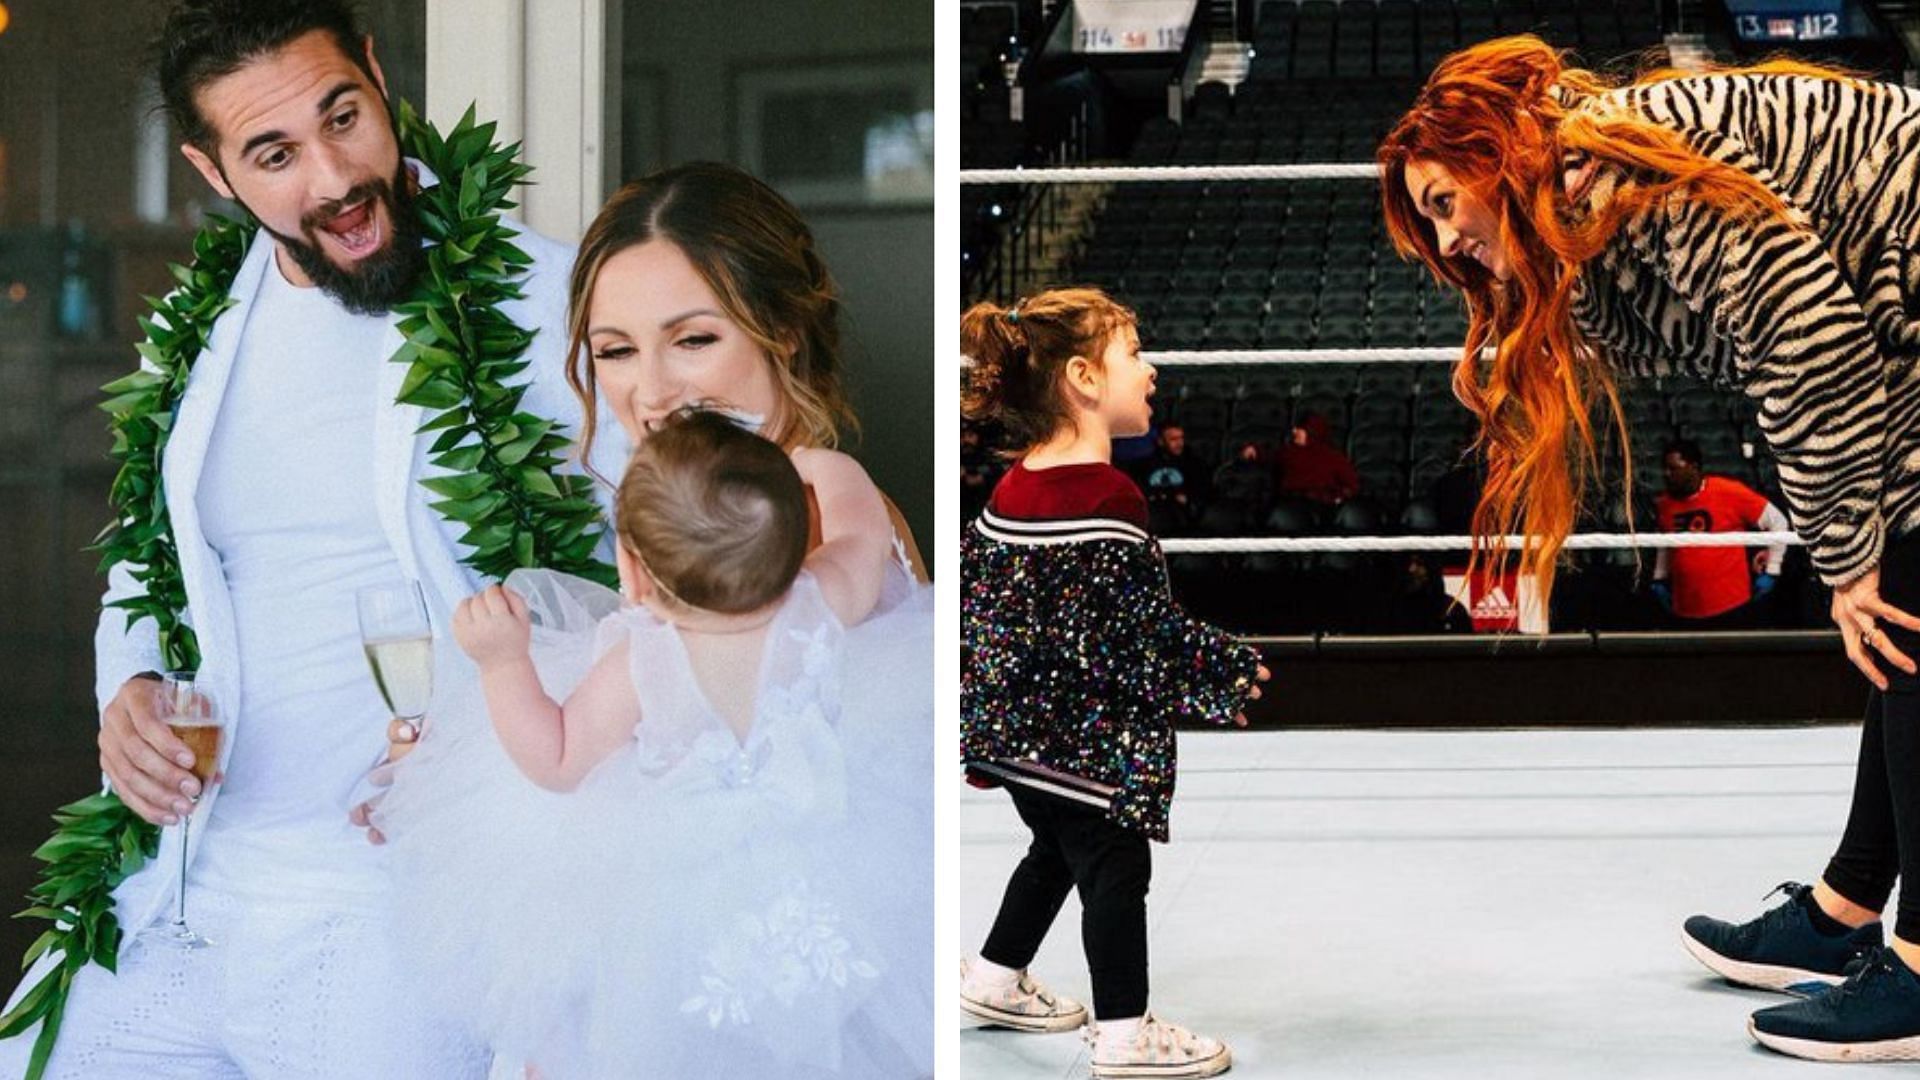 What Were the Emotional First Words of Becky Lynch's Baby